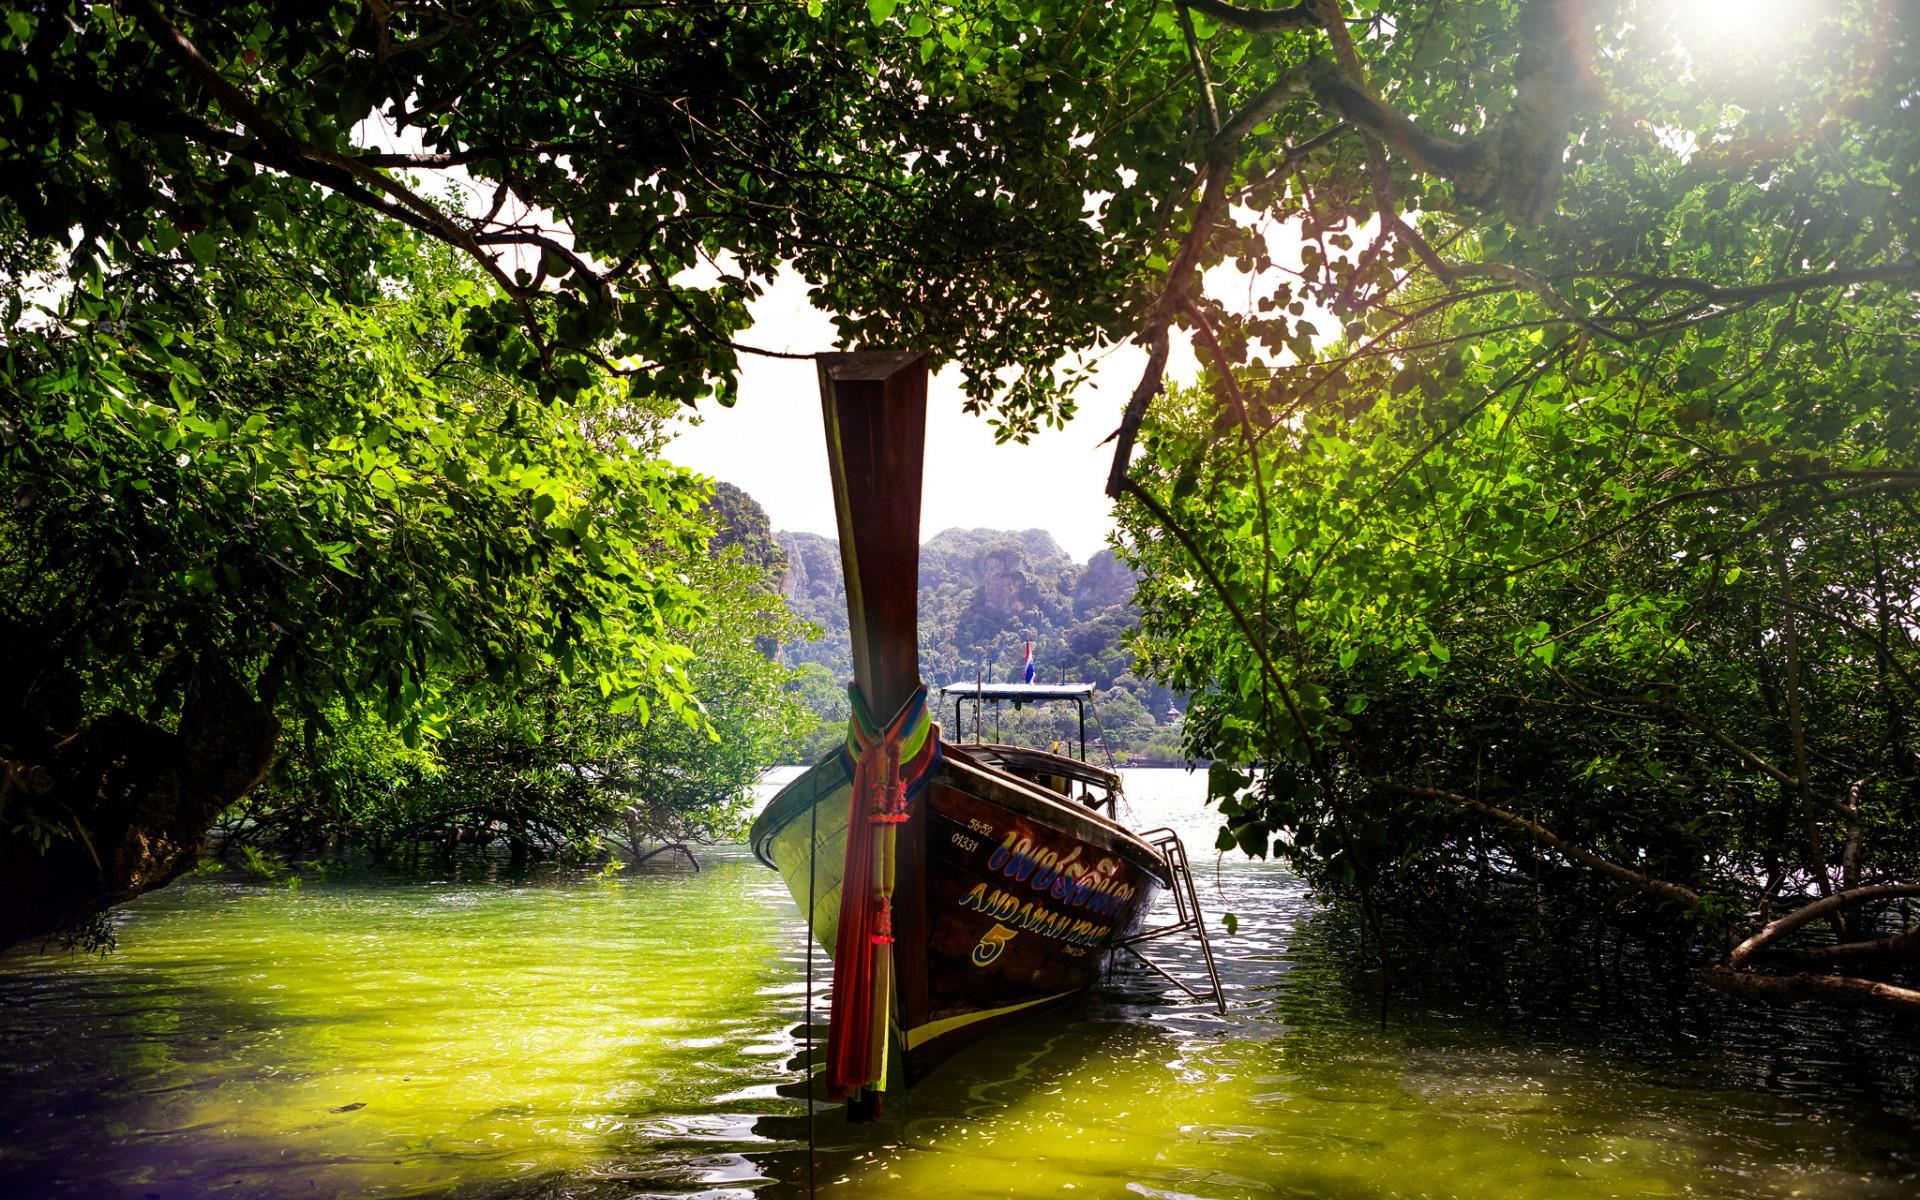 summer, lakes, tranquility, tropical, boat, Thailand, hills, forest